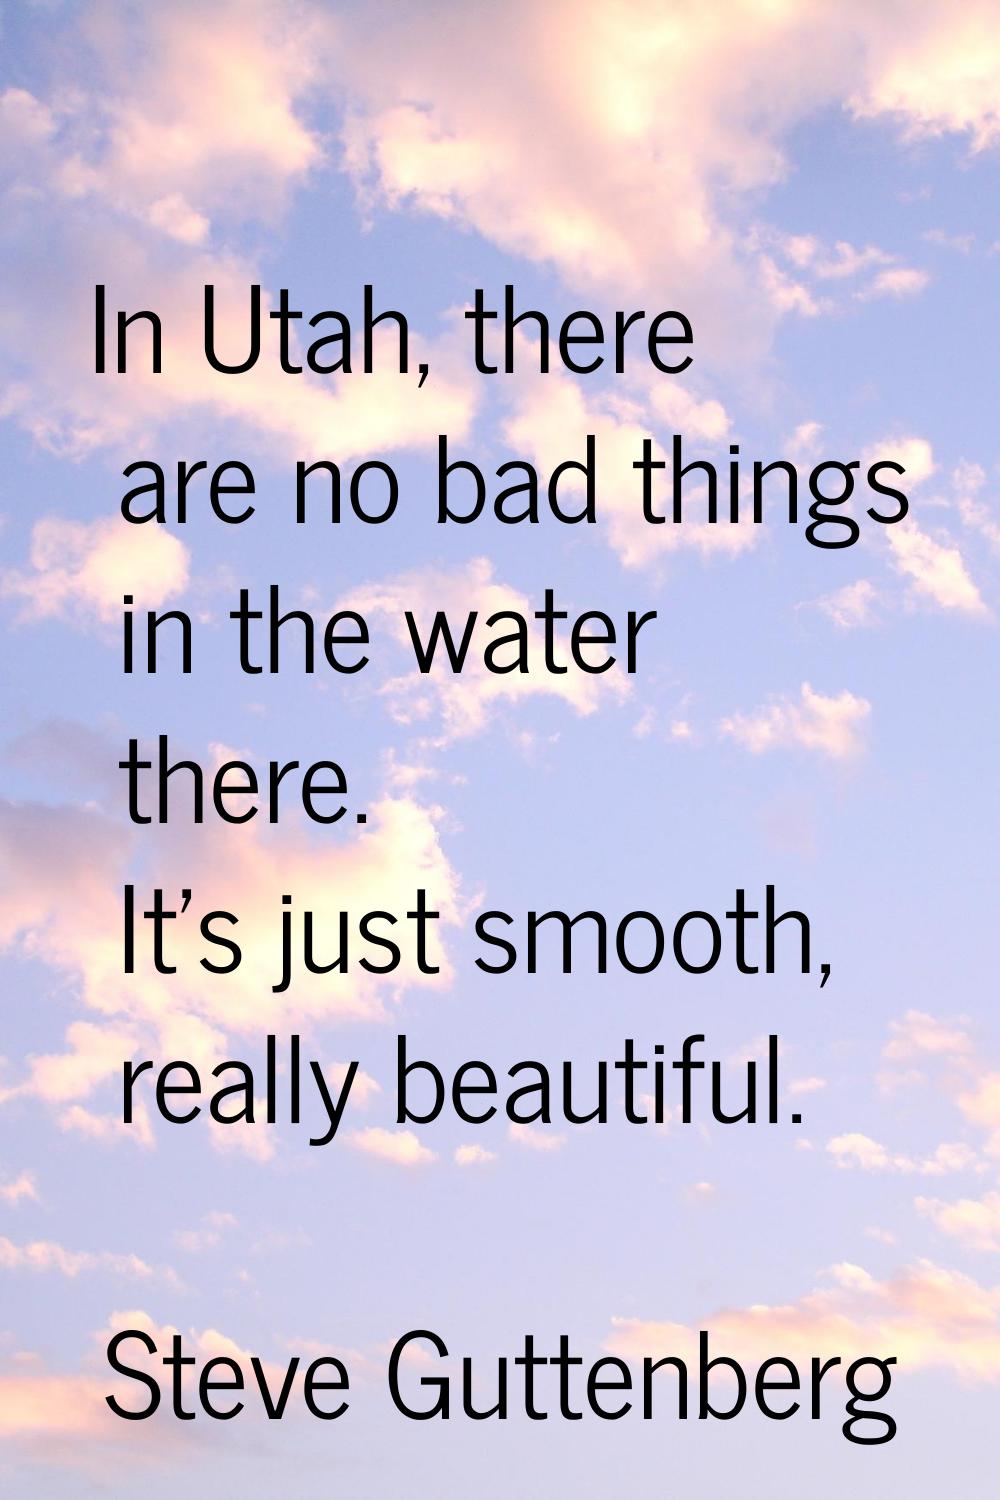 In Utah, there are no bad things in the water there. It's just smooth, really beautiful.